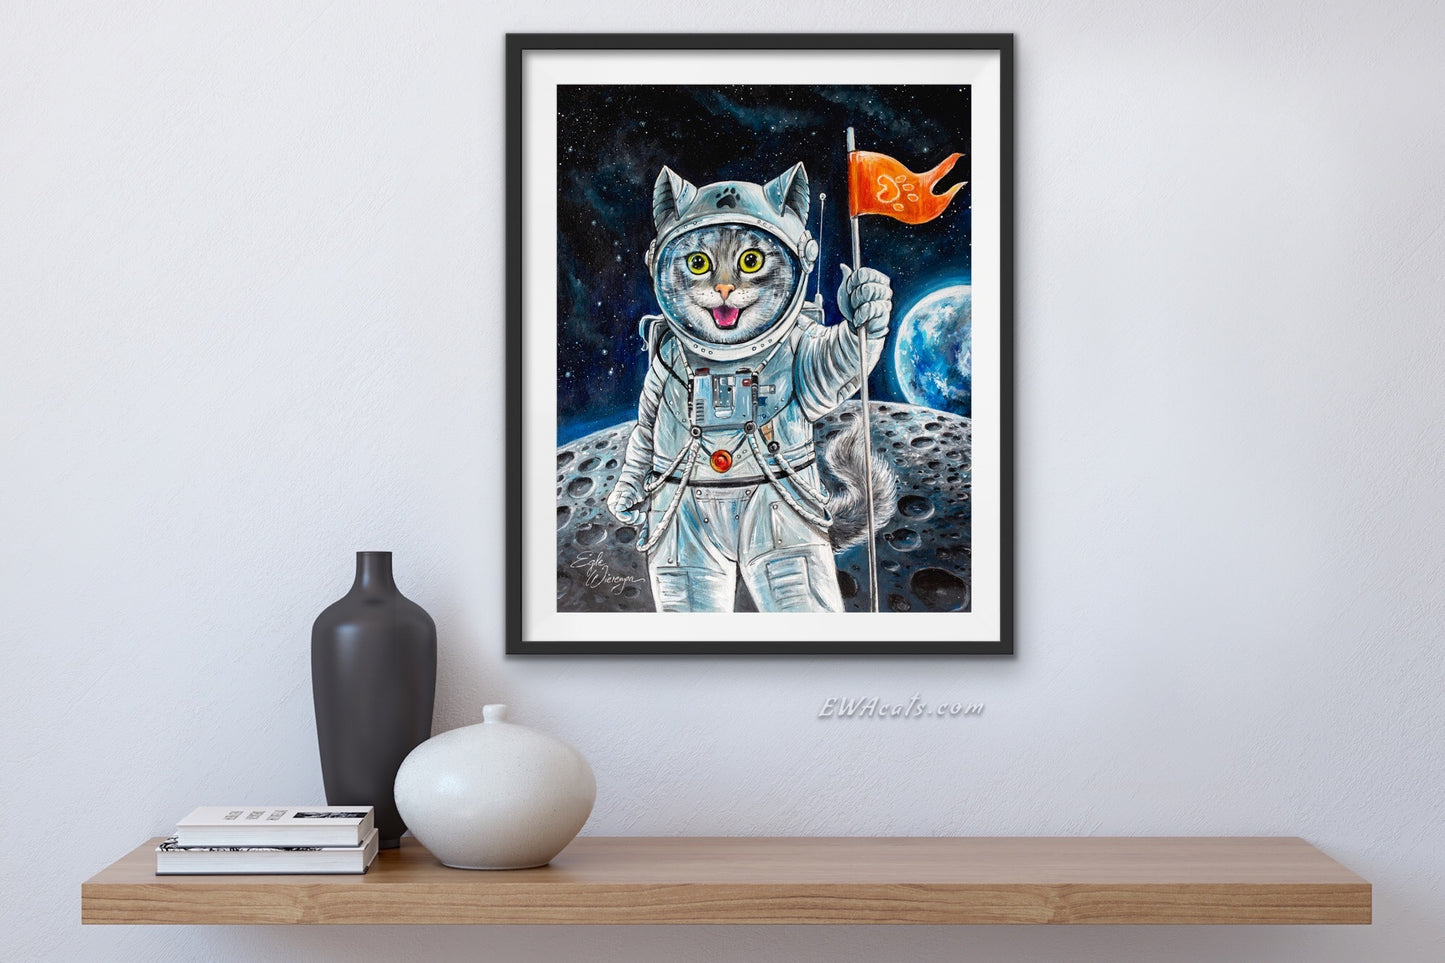 Art Print "First Cat on the Moon"